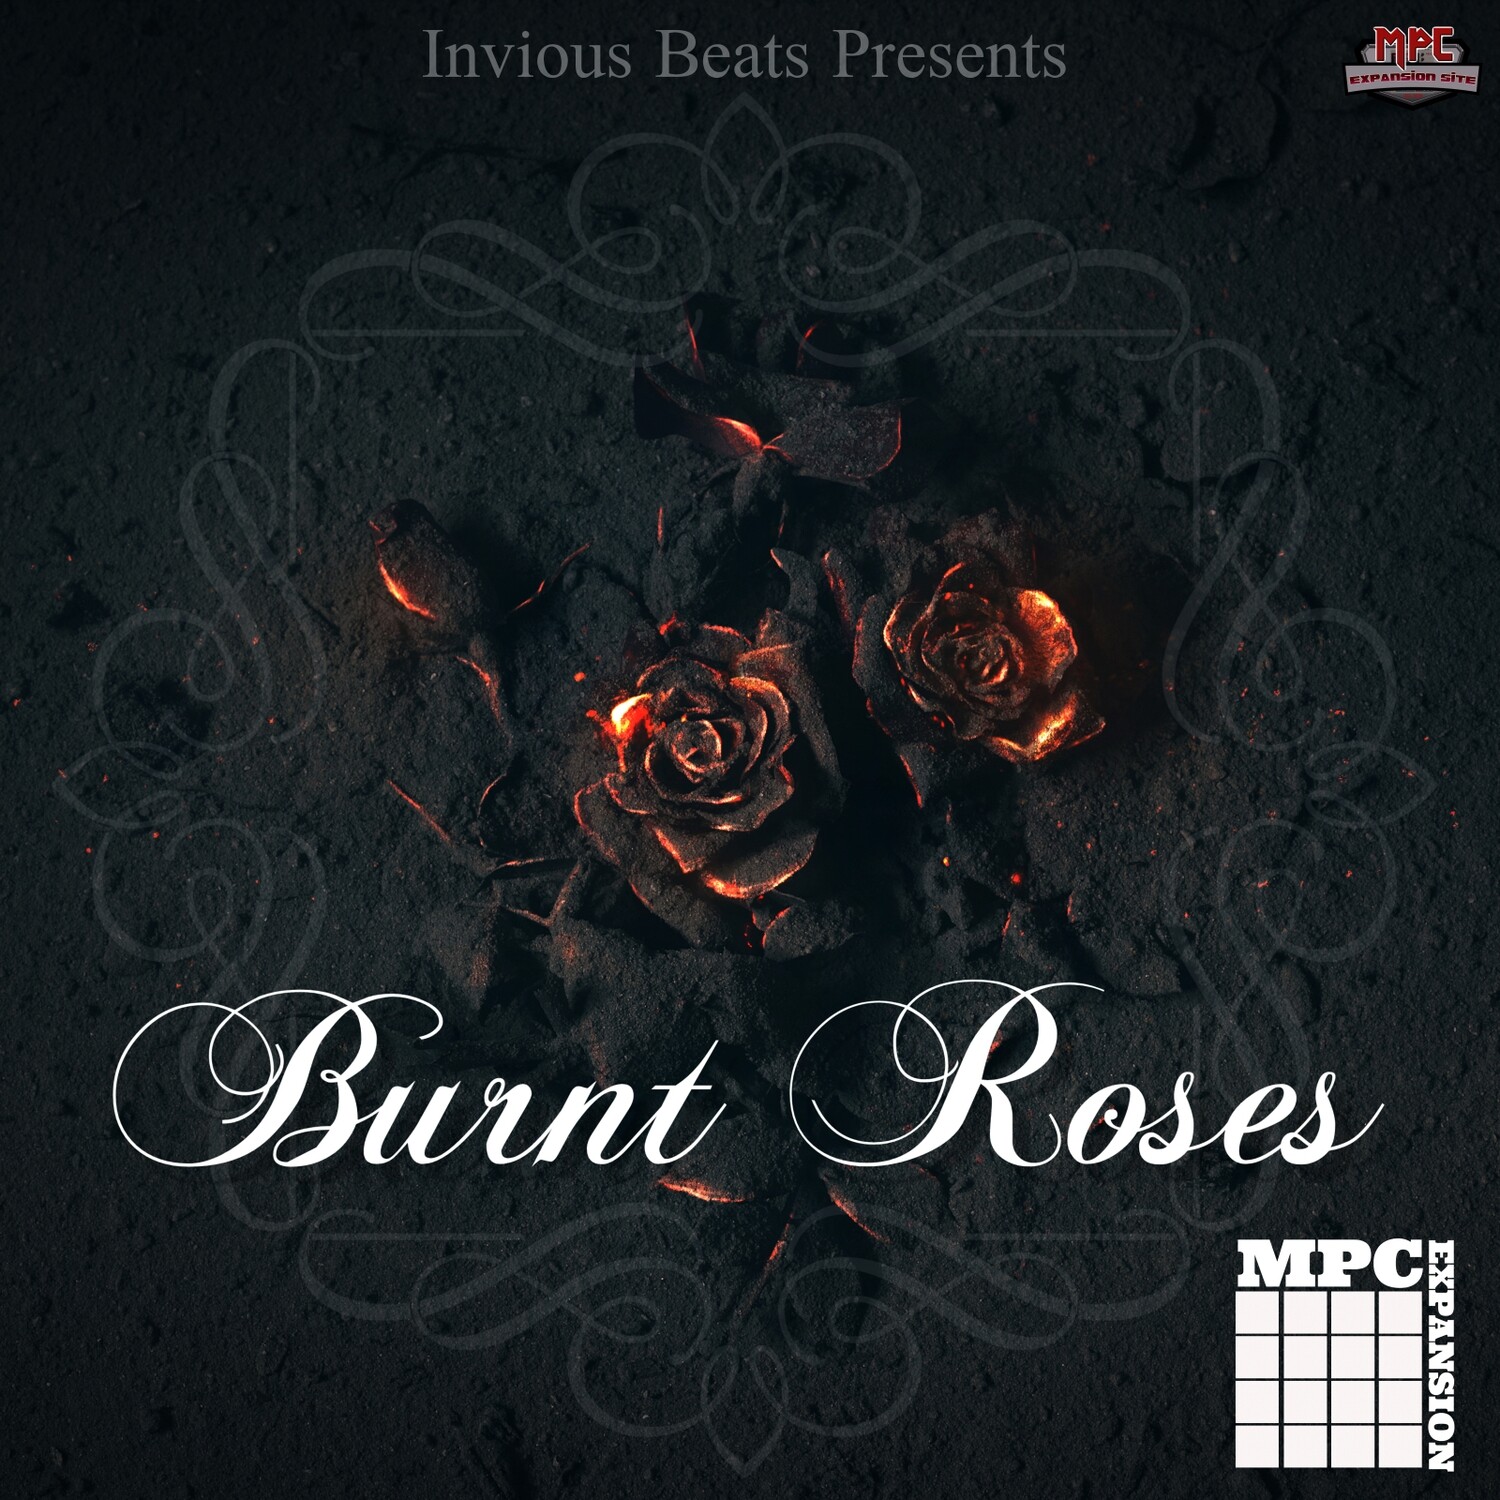 MPC EXPANSION 'BURNT ROSES' by INVIOUS